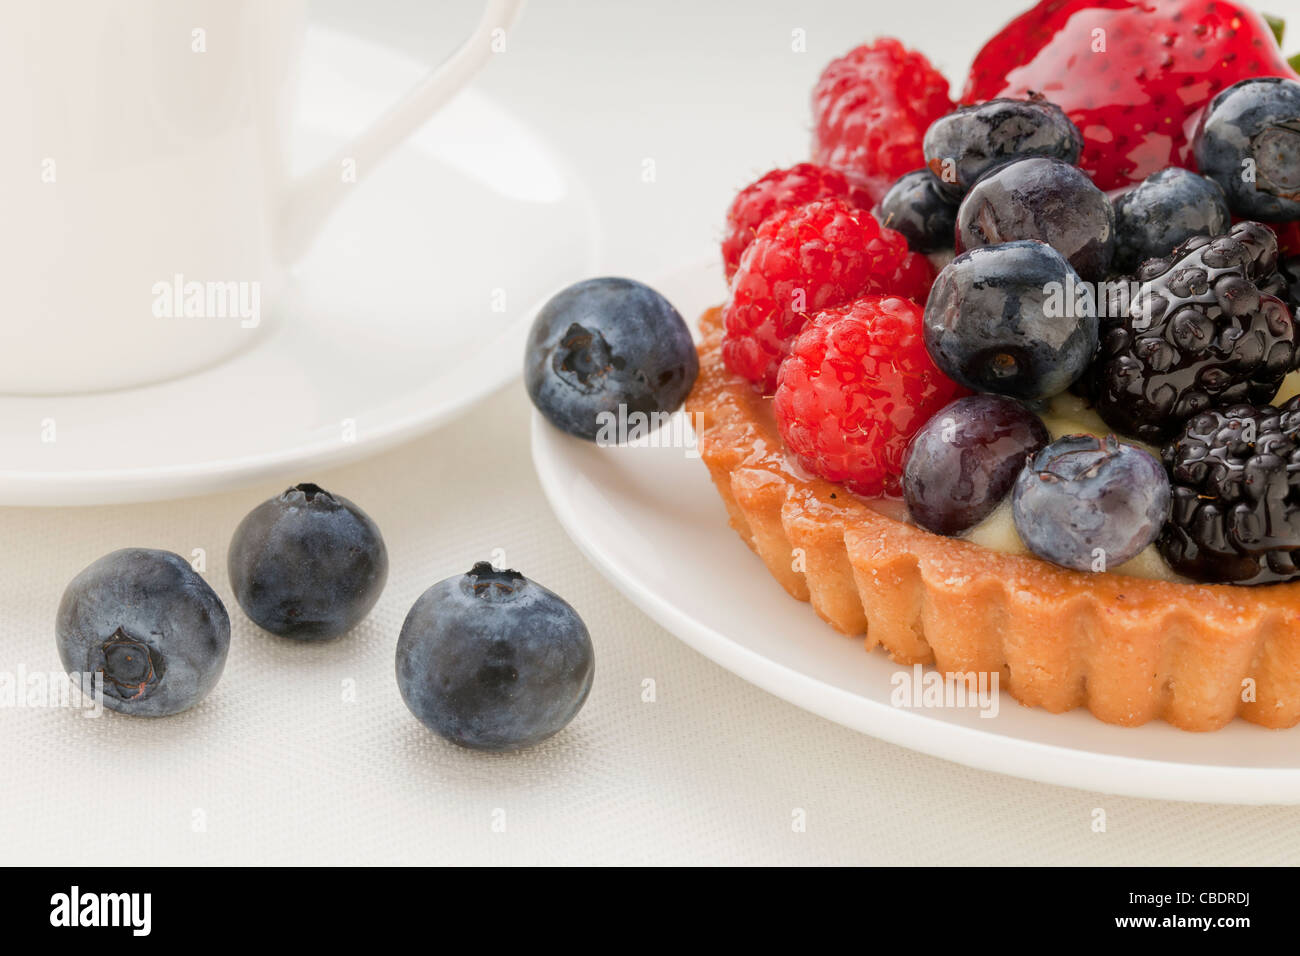 fruit tart with blueberry, blackberry, raspberry and strawberry, a coffee cup in background Stock Photo